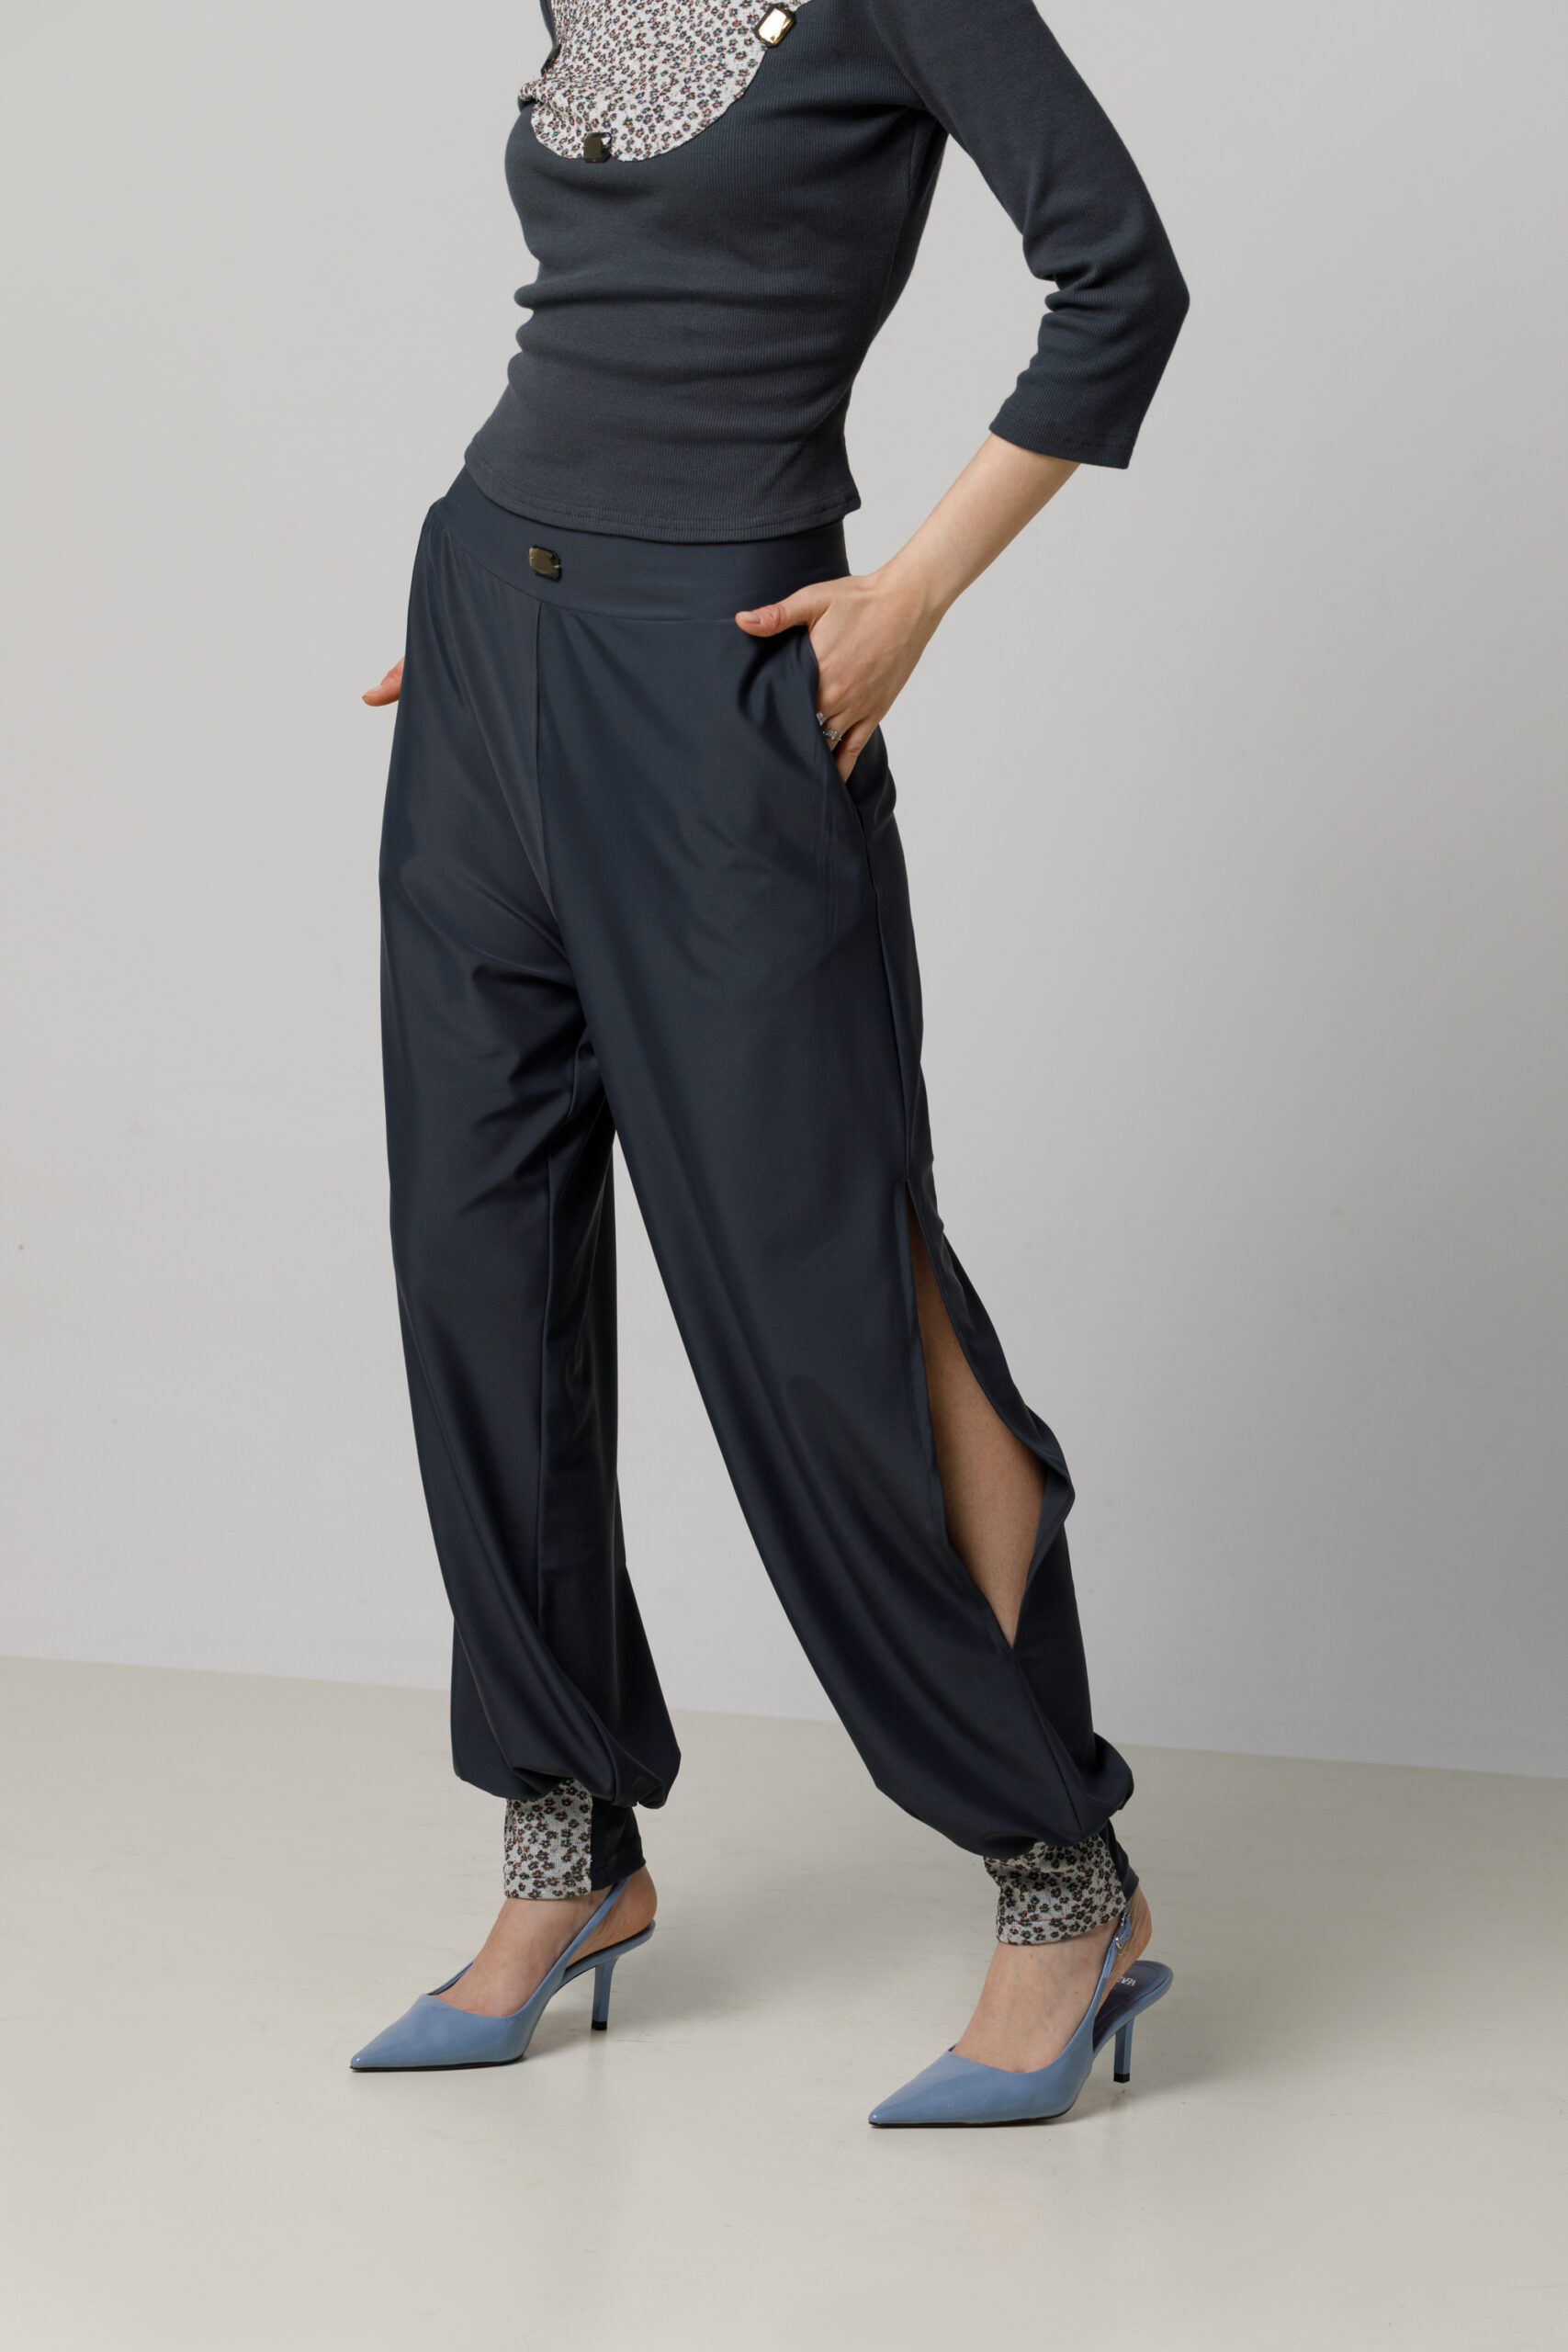 COCO GRAY CASUAL PANTS WITH FLORAL DETAIL. Natural fabrics, original design, handmade embroidery